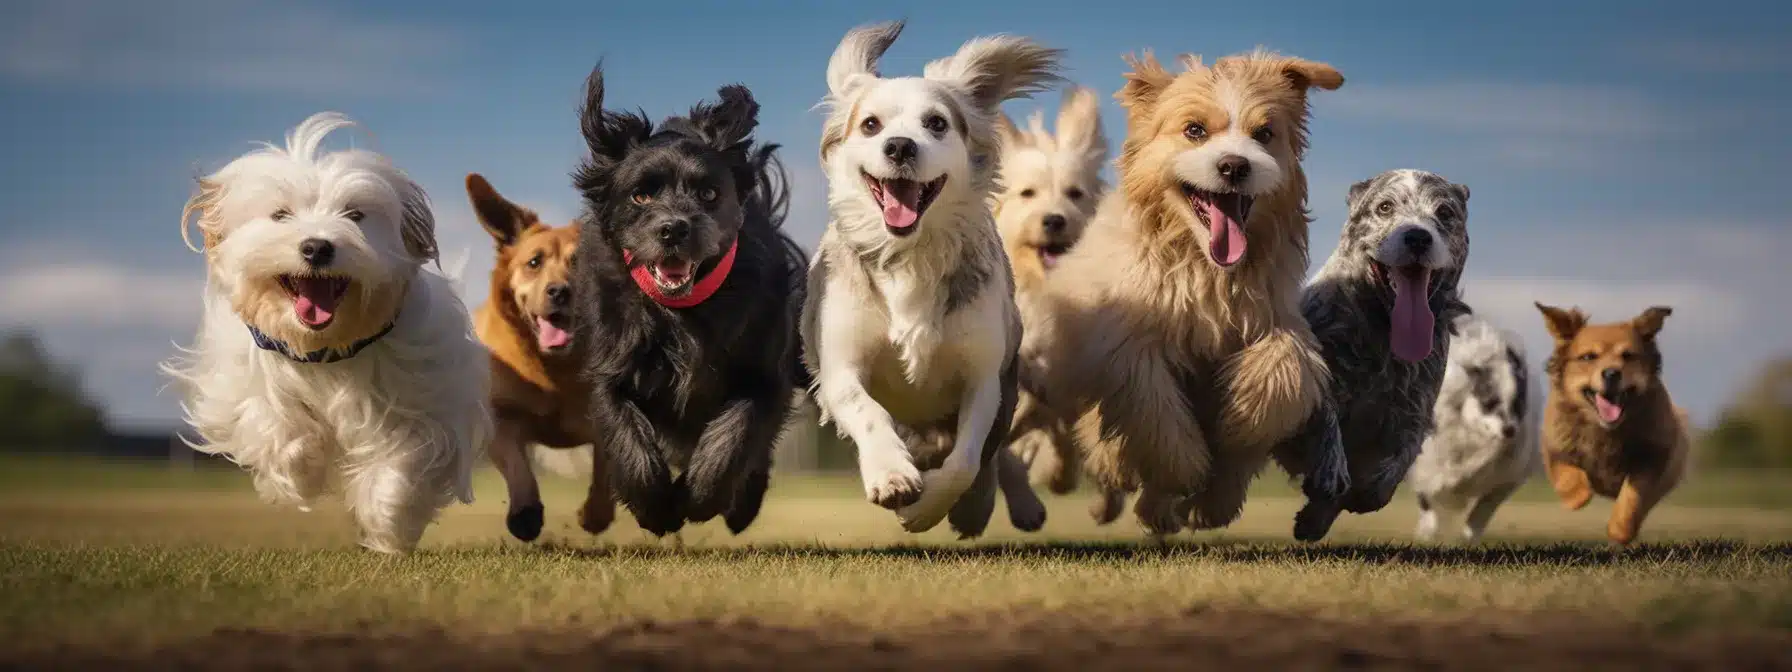 A Diverse Audience Of Different Dog Breeds Chasing After A Ball Representing A Brand'S Message.